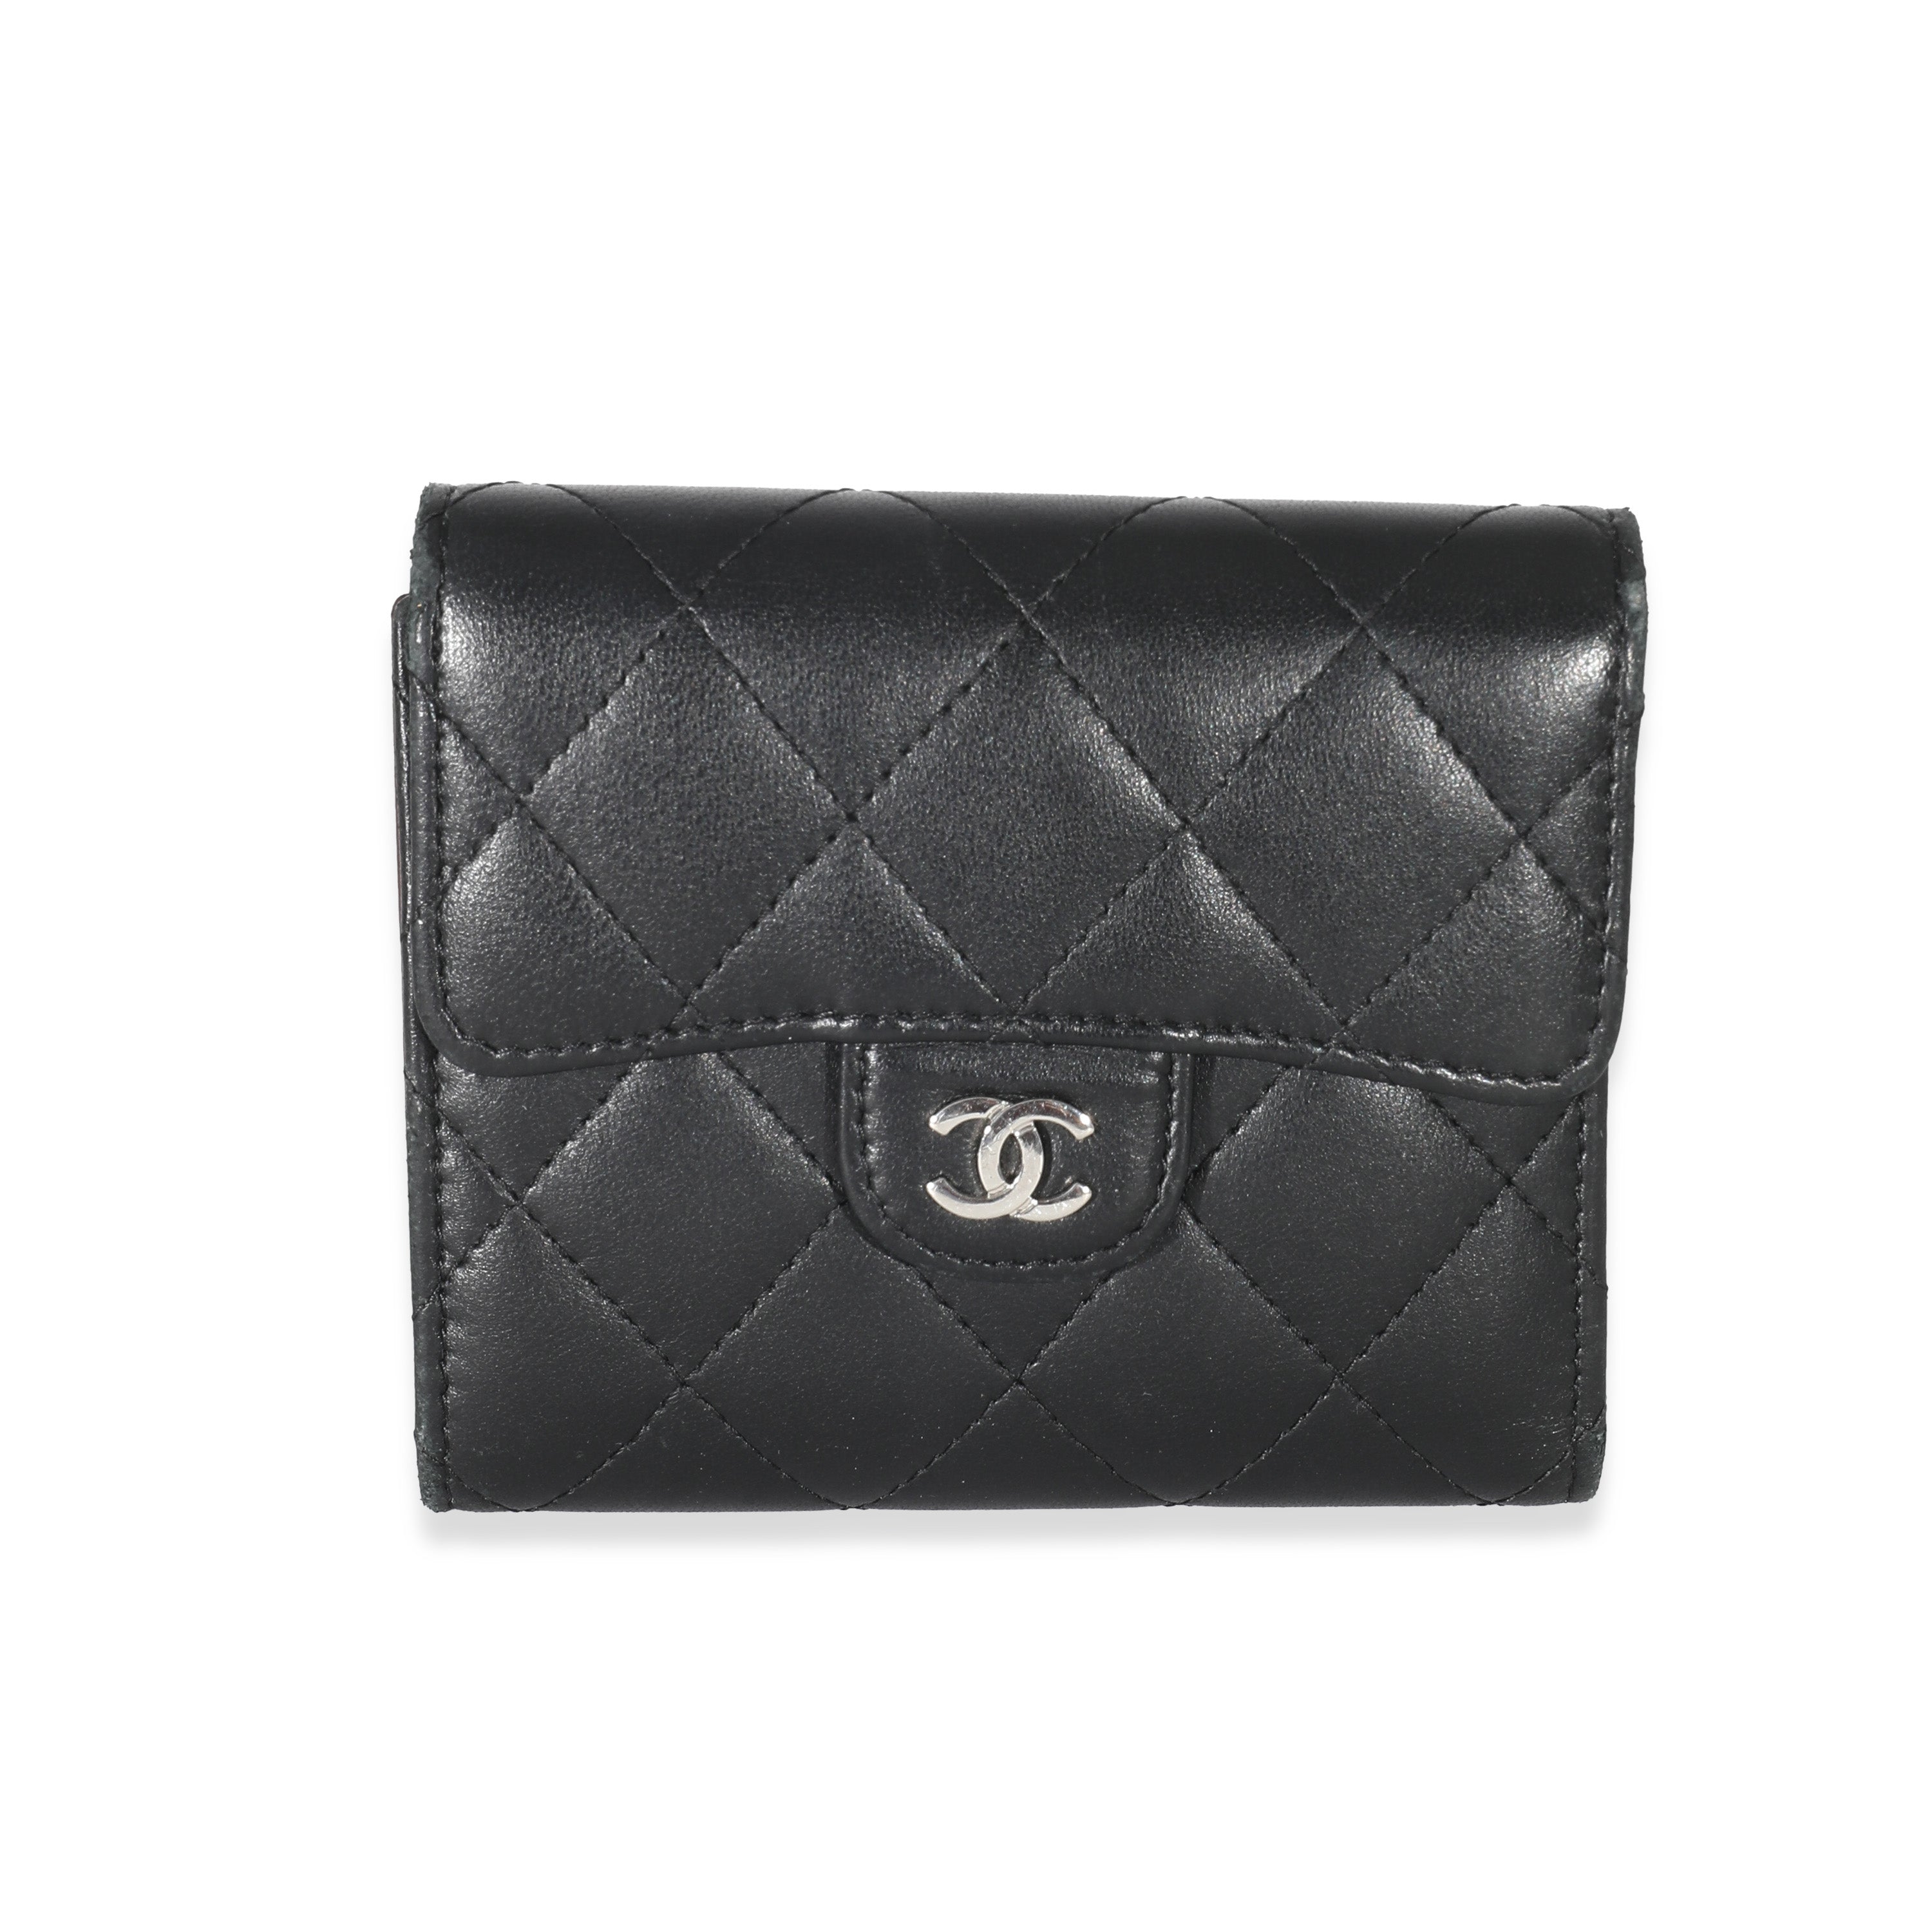 CHANEL Caviar Quilted Medium Flap Wallet Black 243340